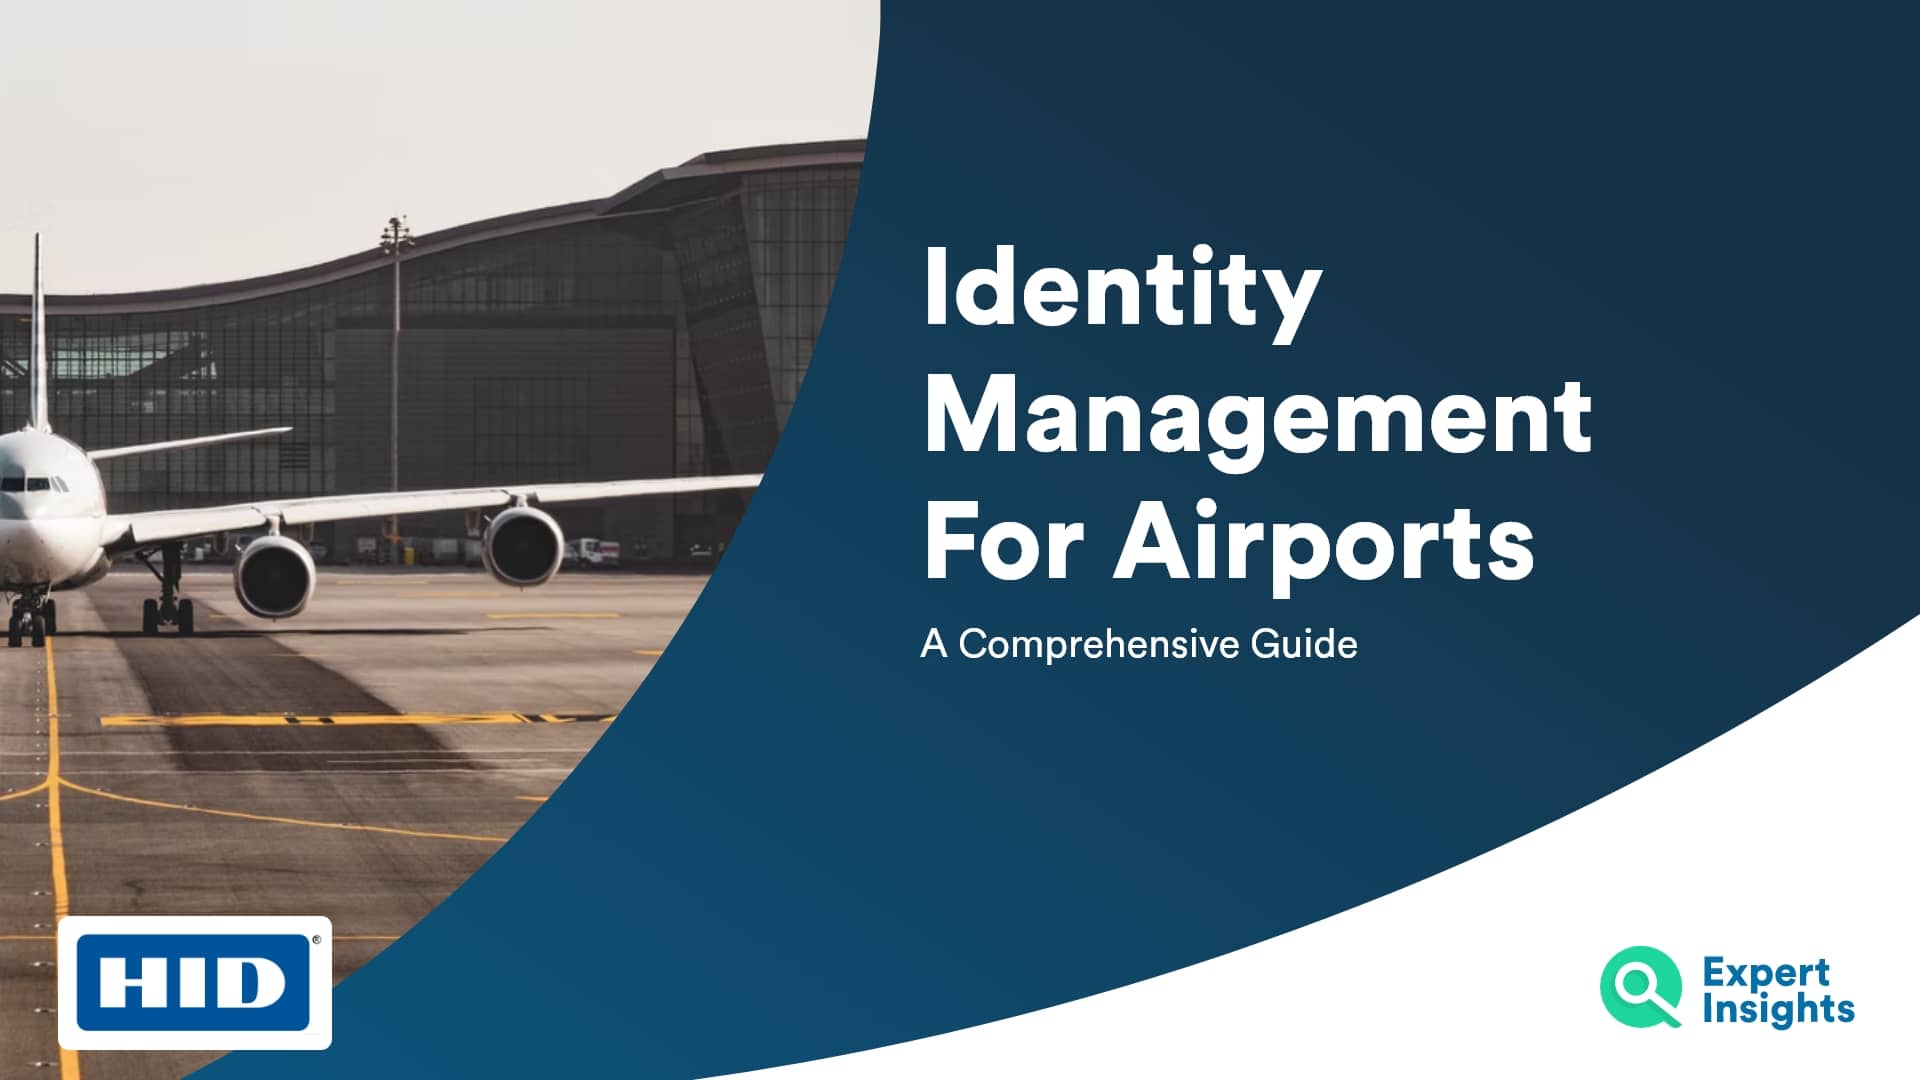 Identity Management For Airports - Expert Insights